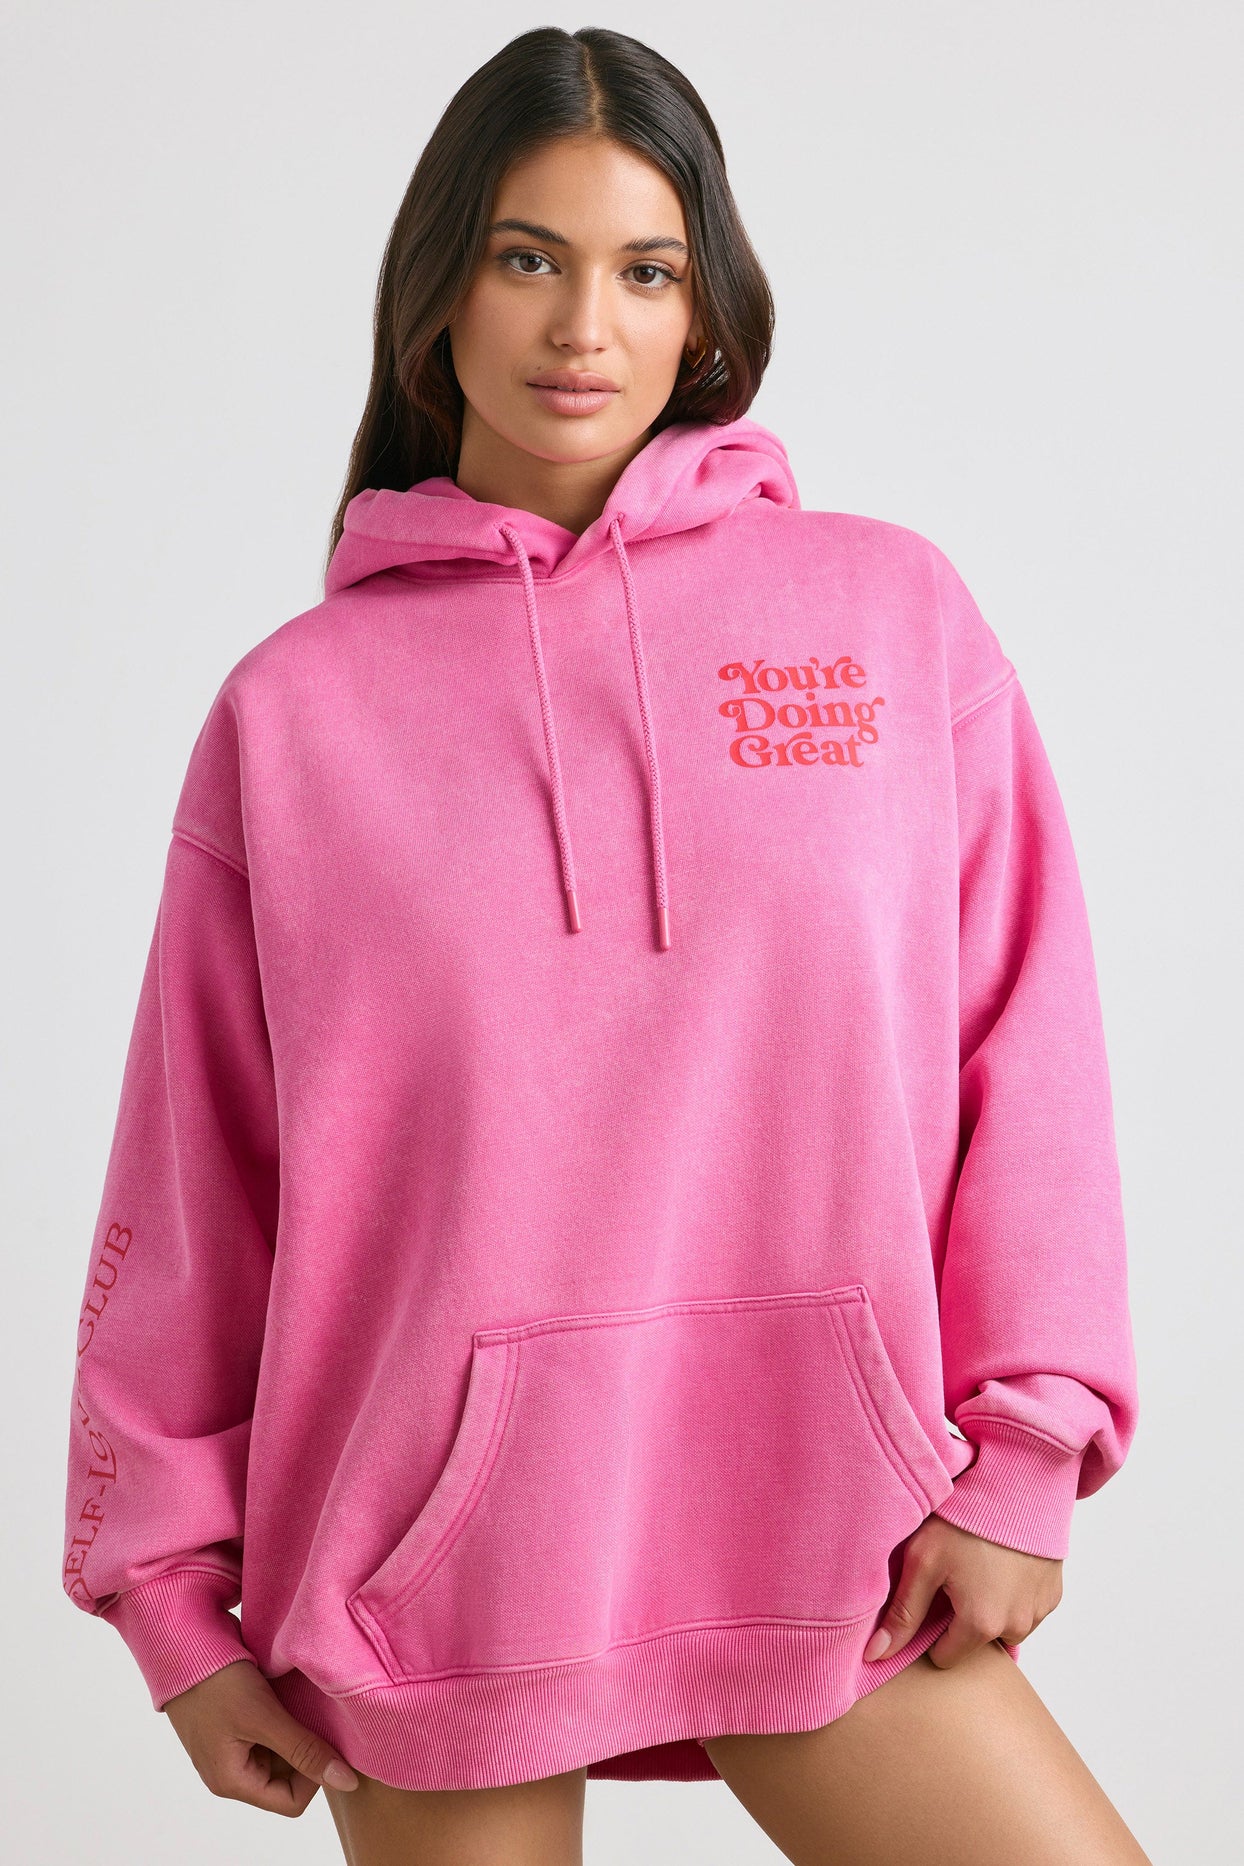 Weekend Vibes Only Hot Pink Sweatshirt – Southern Bliss Company